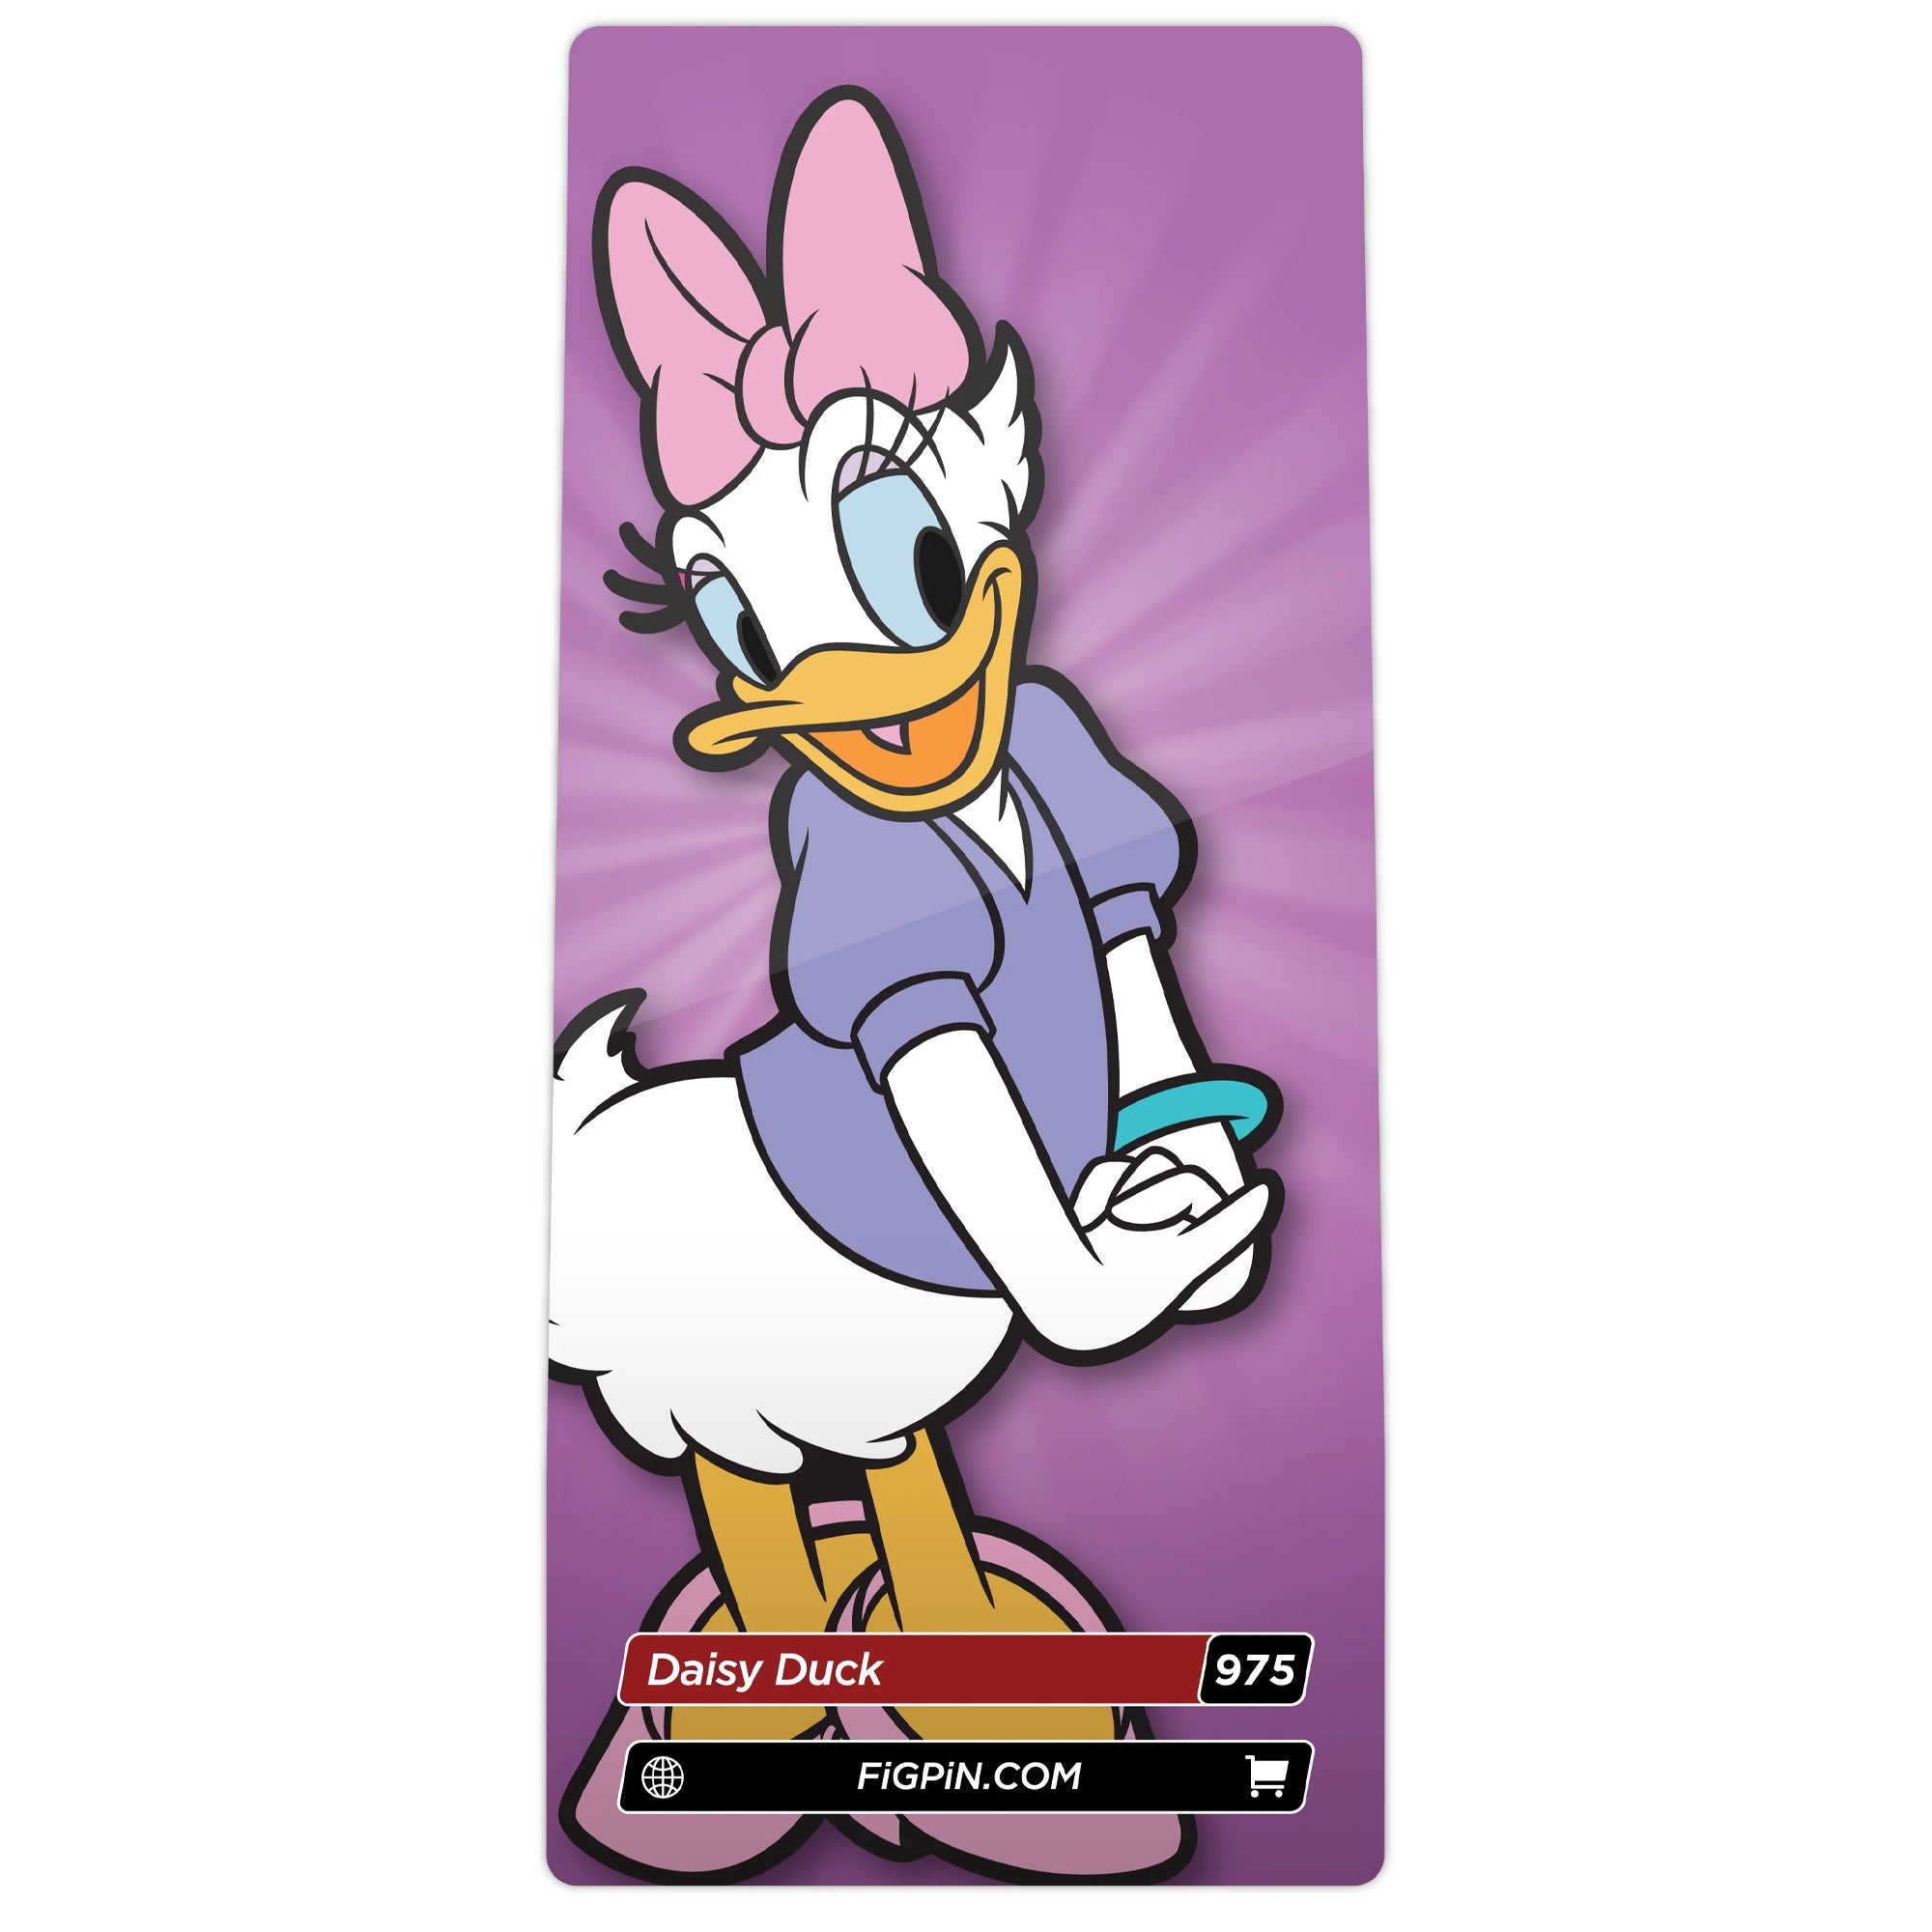 Disney Daisy Duck Limited Edition 3" Collectible Pin #975